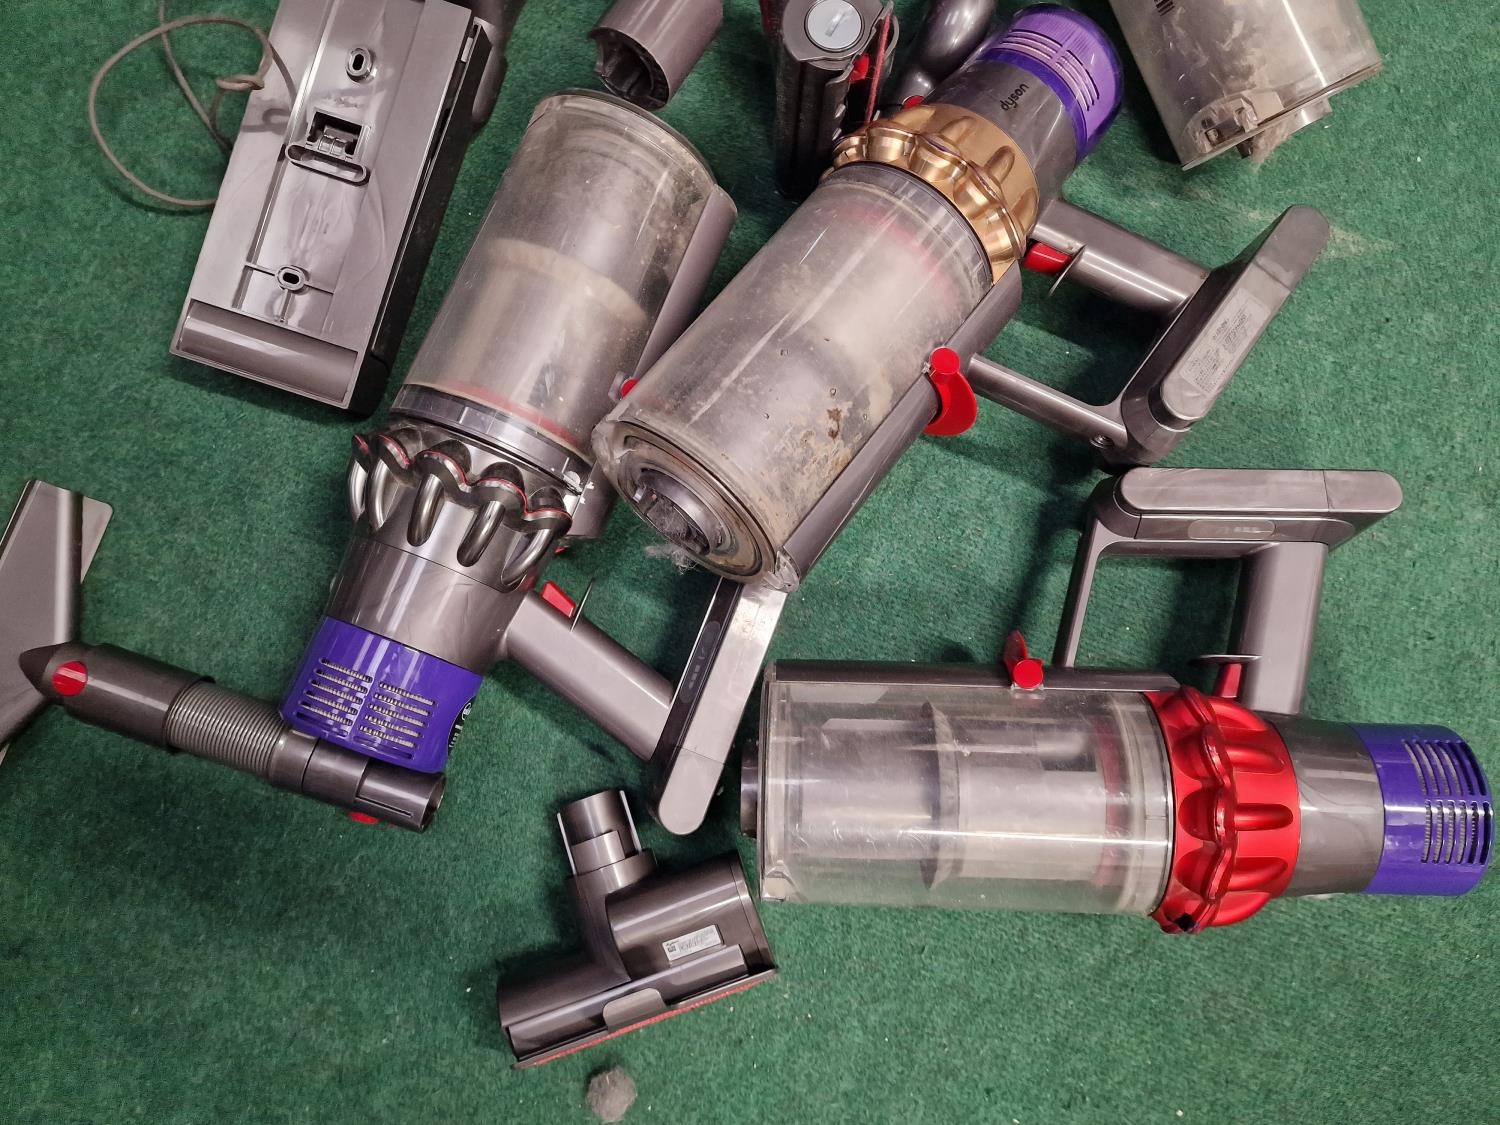 Collection of Dyson cordless vacuum cleaner spares. - Image 2 of 3